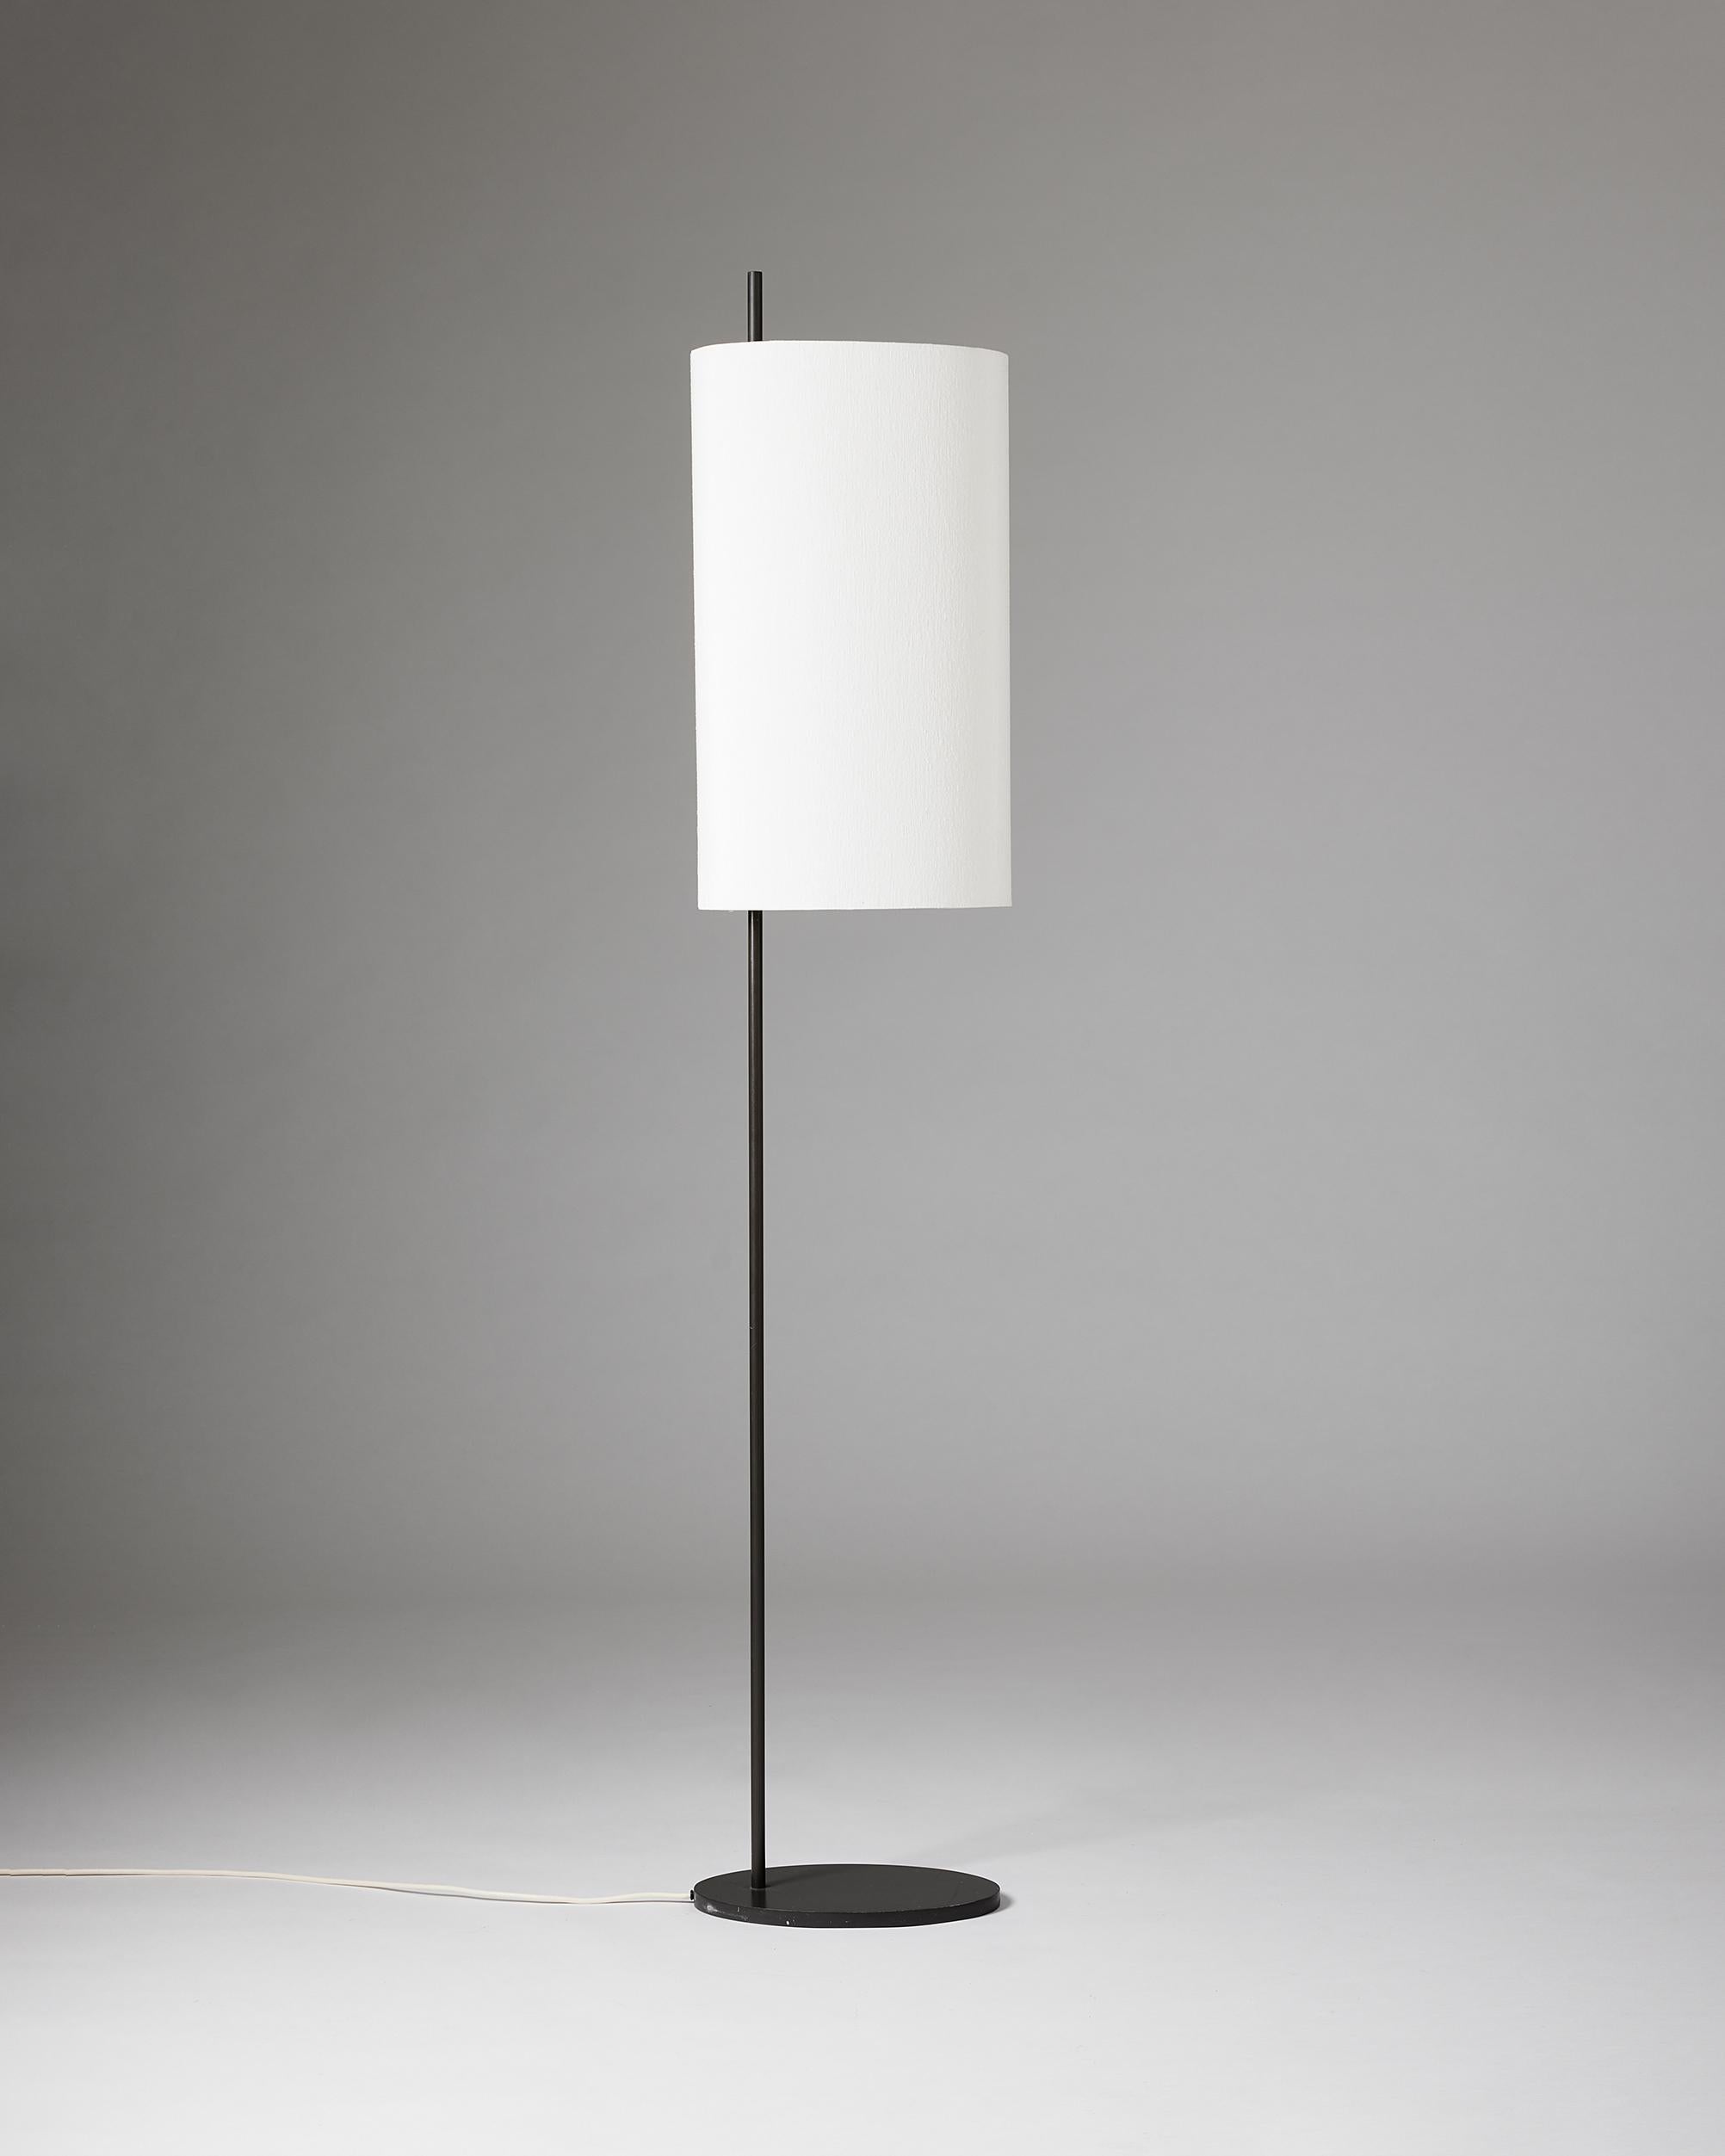 Floor lamp ‘AJ Royal’ designed by Arne Jacobsen for Louis Poulsen,
Denmark, 1950s.

Textile and metal.

Measures: H: 181.5 cm
Height of the shade: 60.5 cm
Width of the shade: 35.5 cm
Width of the base: 35 cm
Length of the base: 22 cm